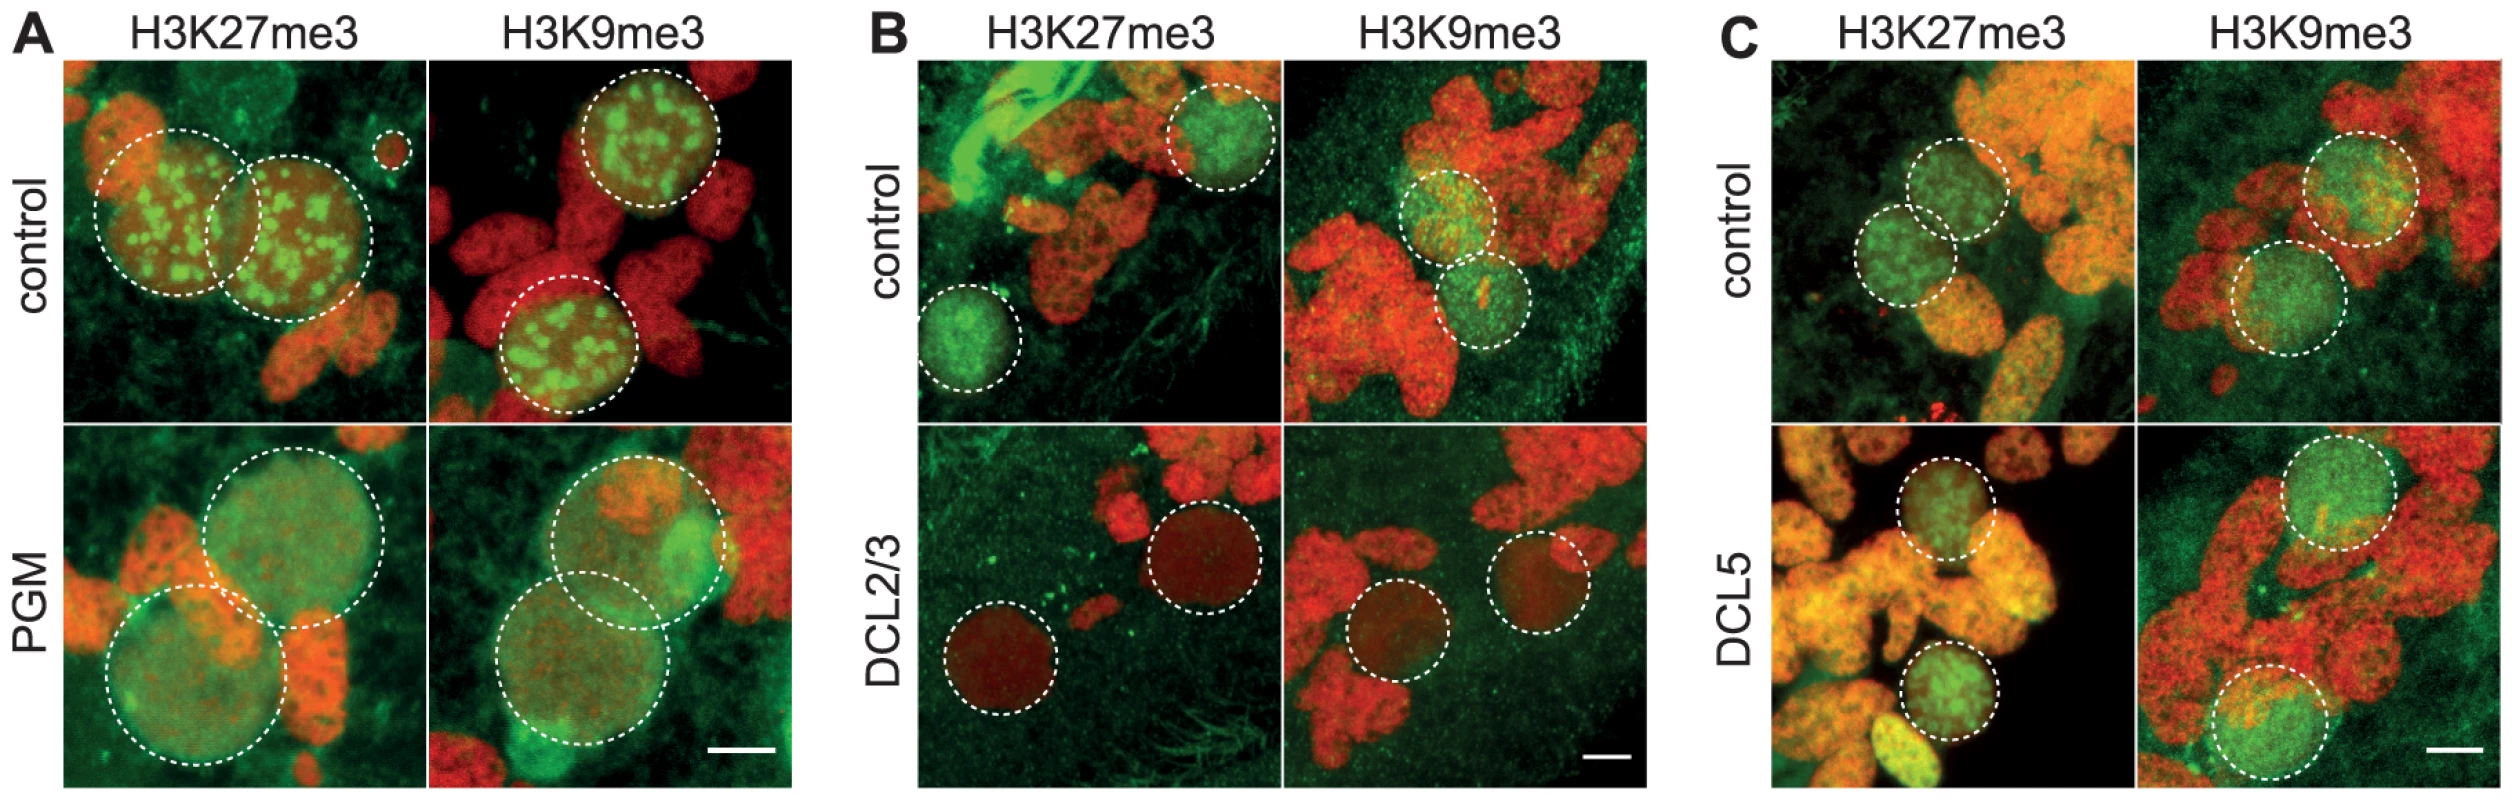 Depletion of the Pgm endonuclease and of the Dicer-Like 2 and 3 proteins alter H3K27me3 and H3K9 me3 localization.